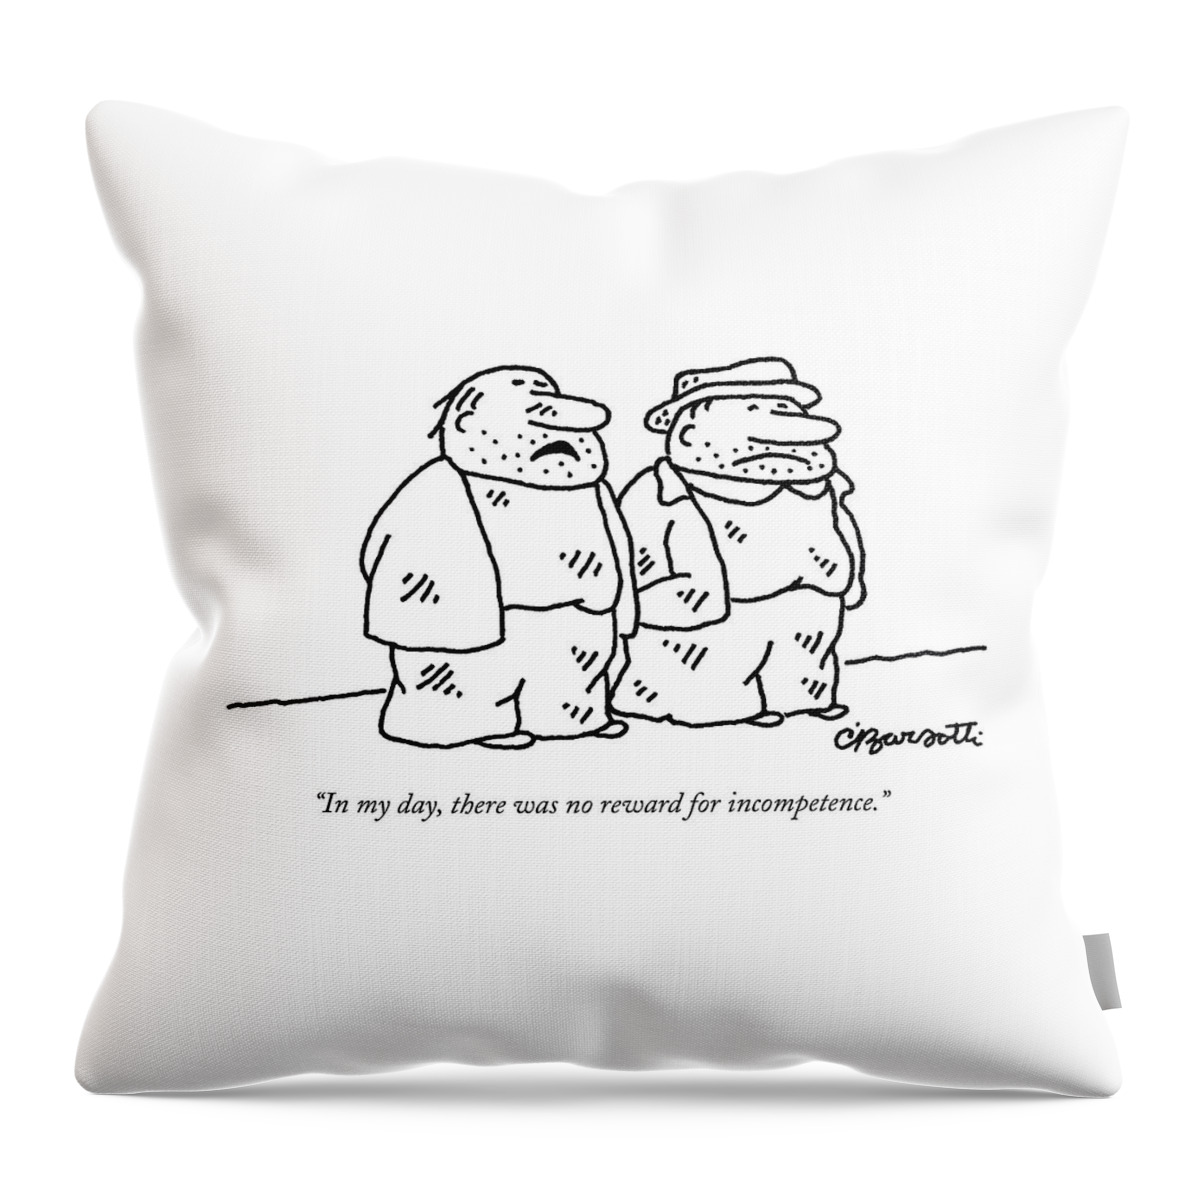 In My Day, There Was No Reward For Incompetence Throw Pillow